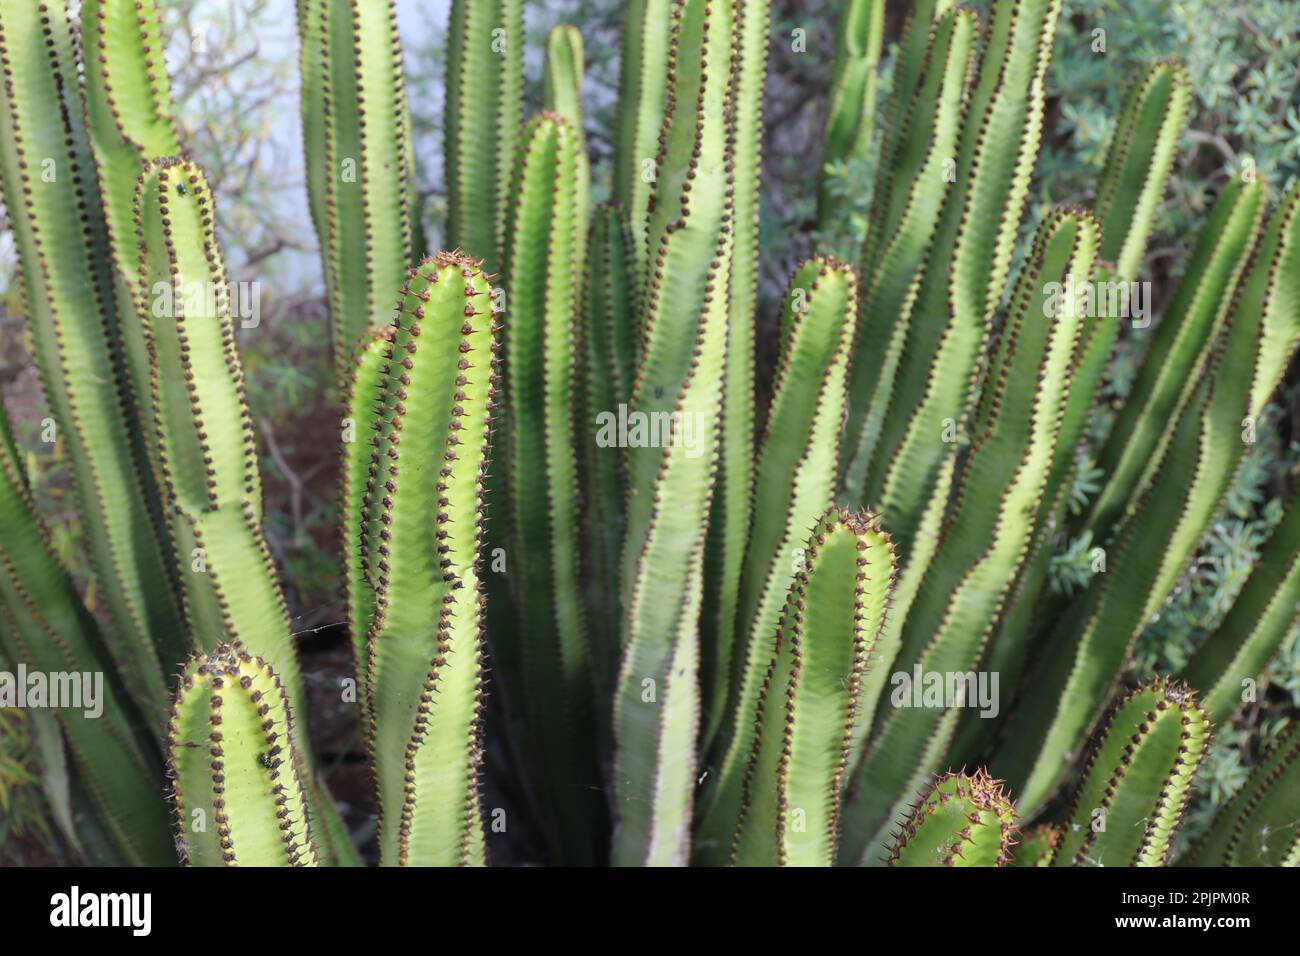 Close-up detail of the Euphorbia Canariensis cactus Stock Photo